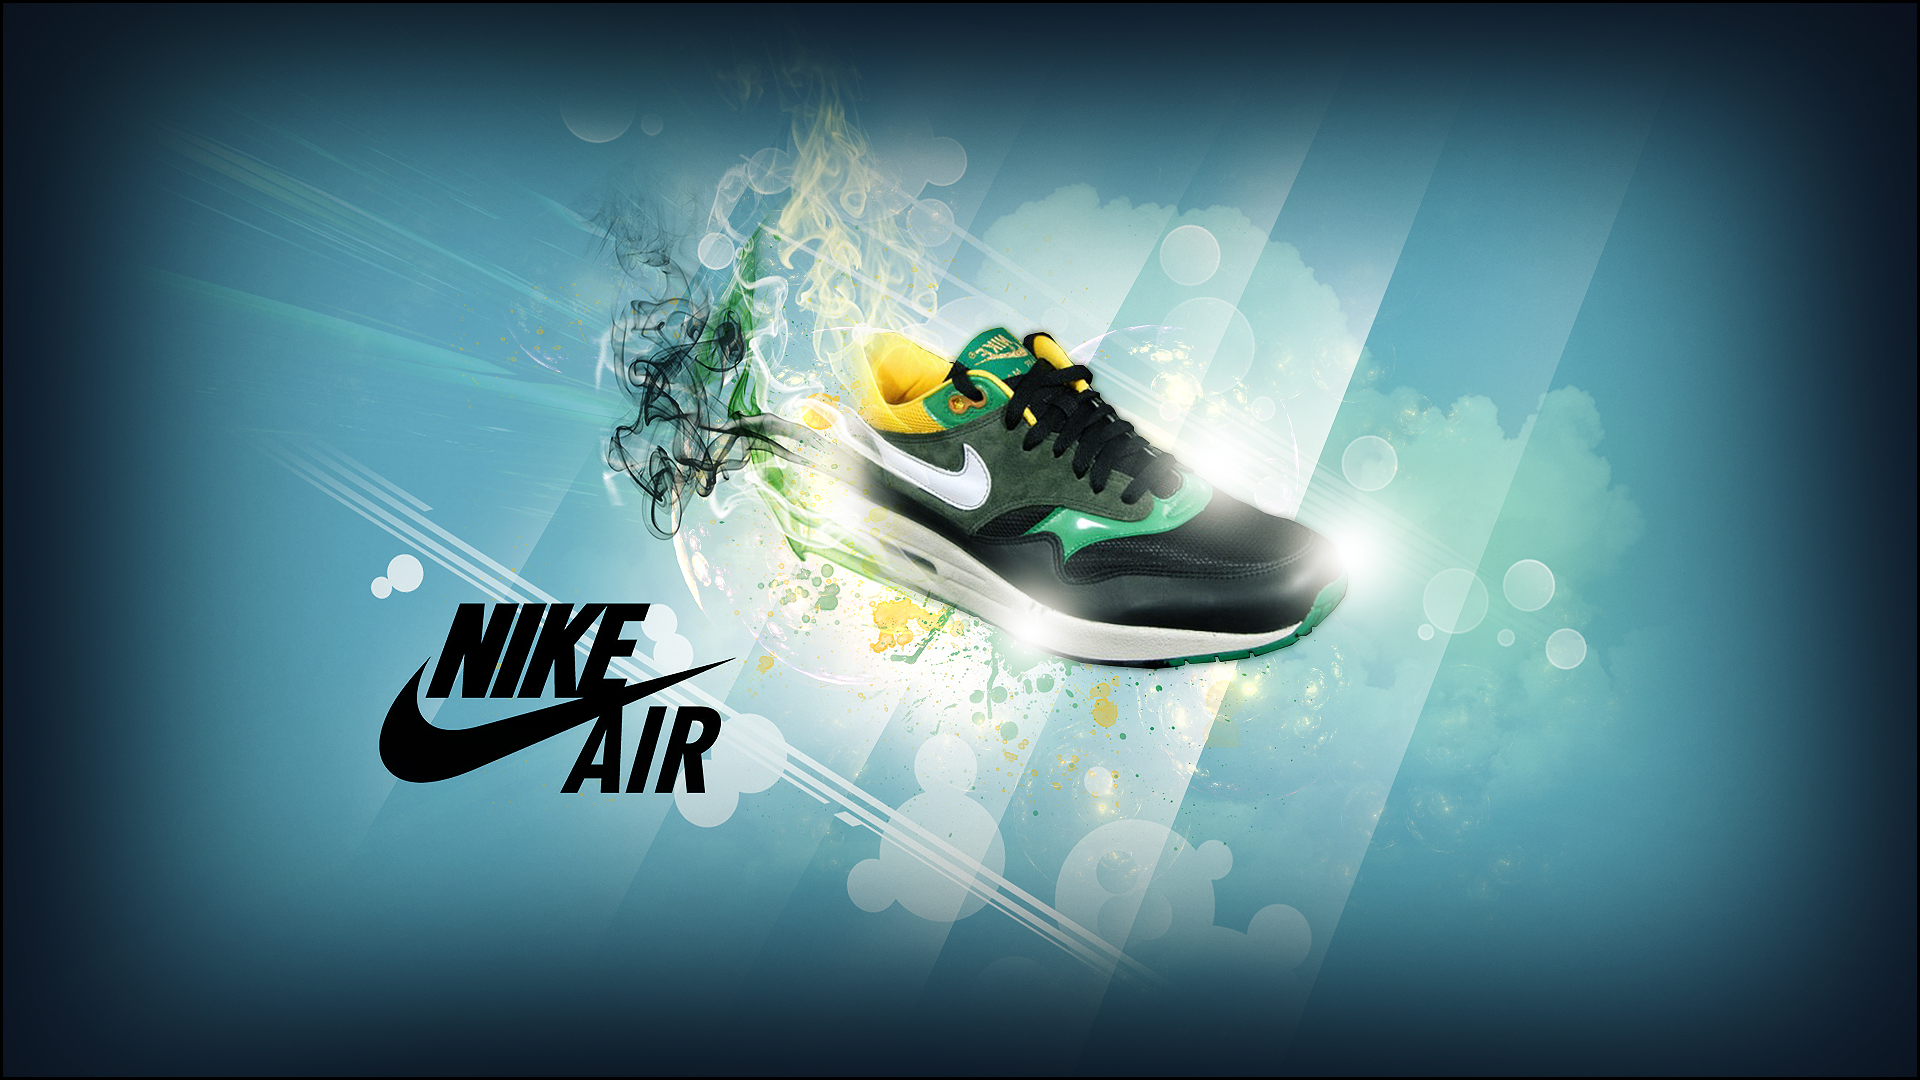 Nike Air 1 Wallpaper by Ghost-3 on